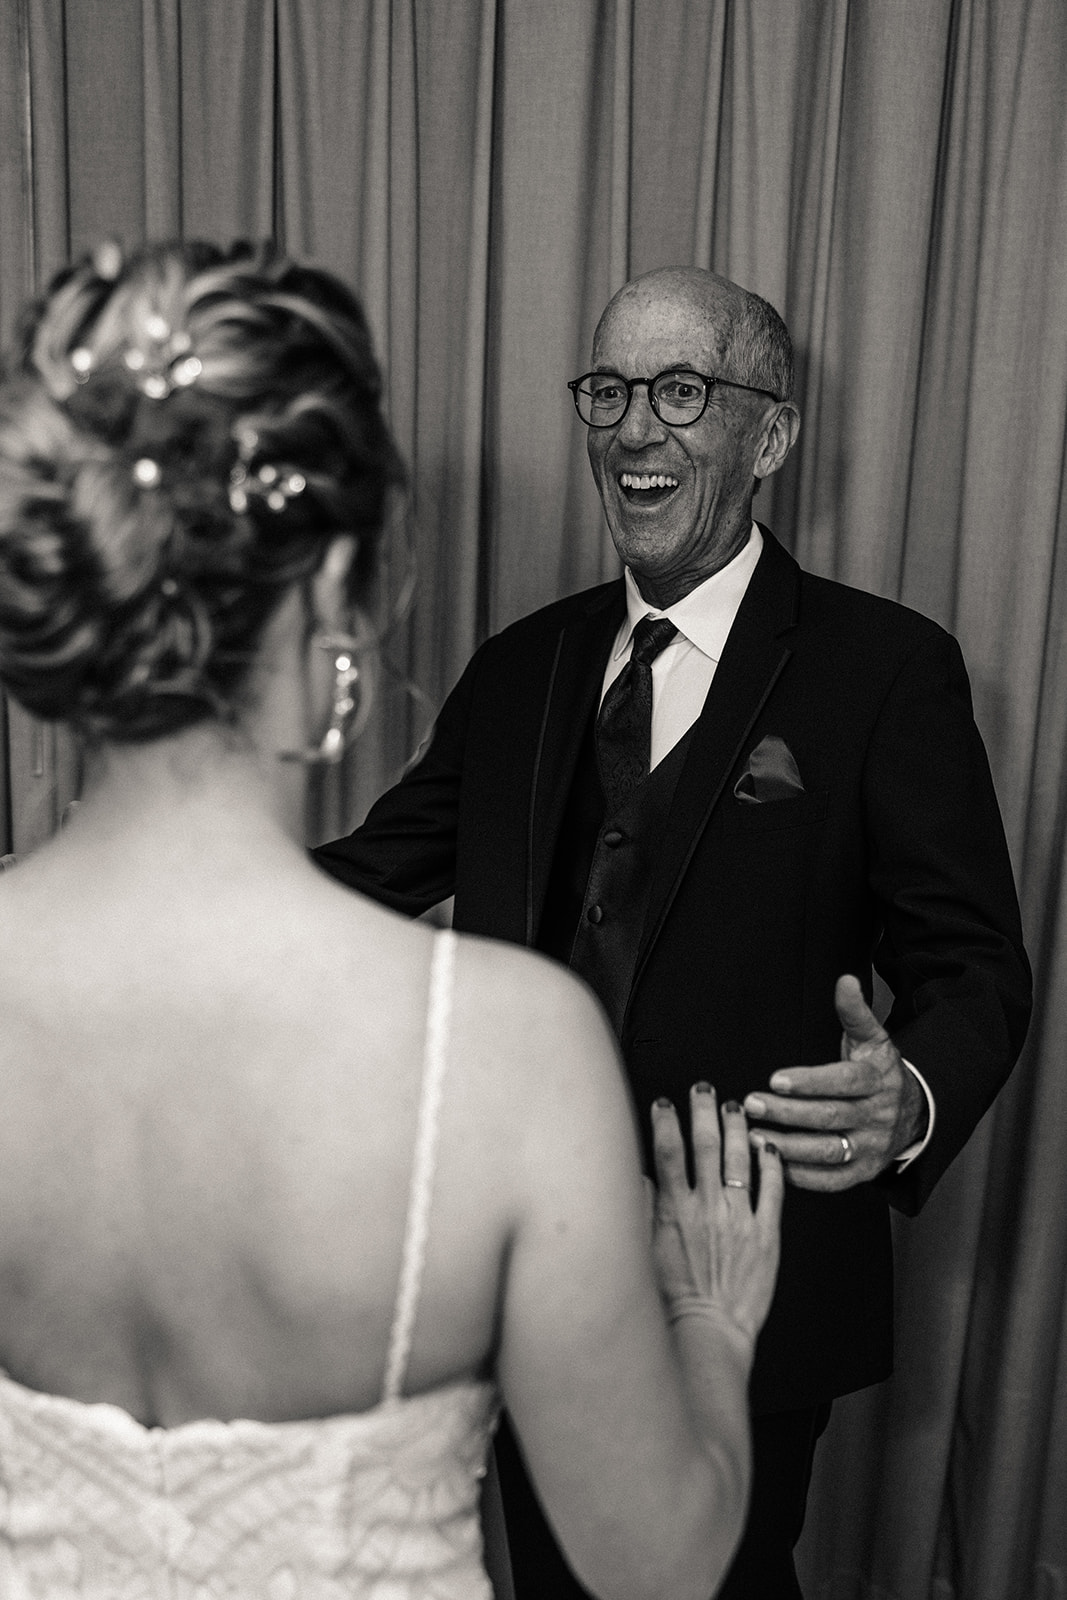 The father of the bride seeing his daughter in her wedding dress for the first time, smiling ear-to-ear.